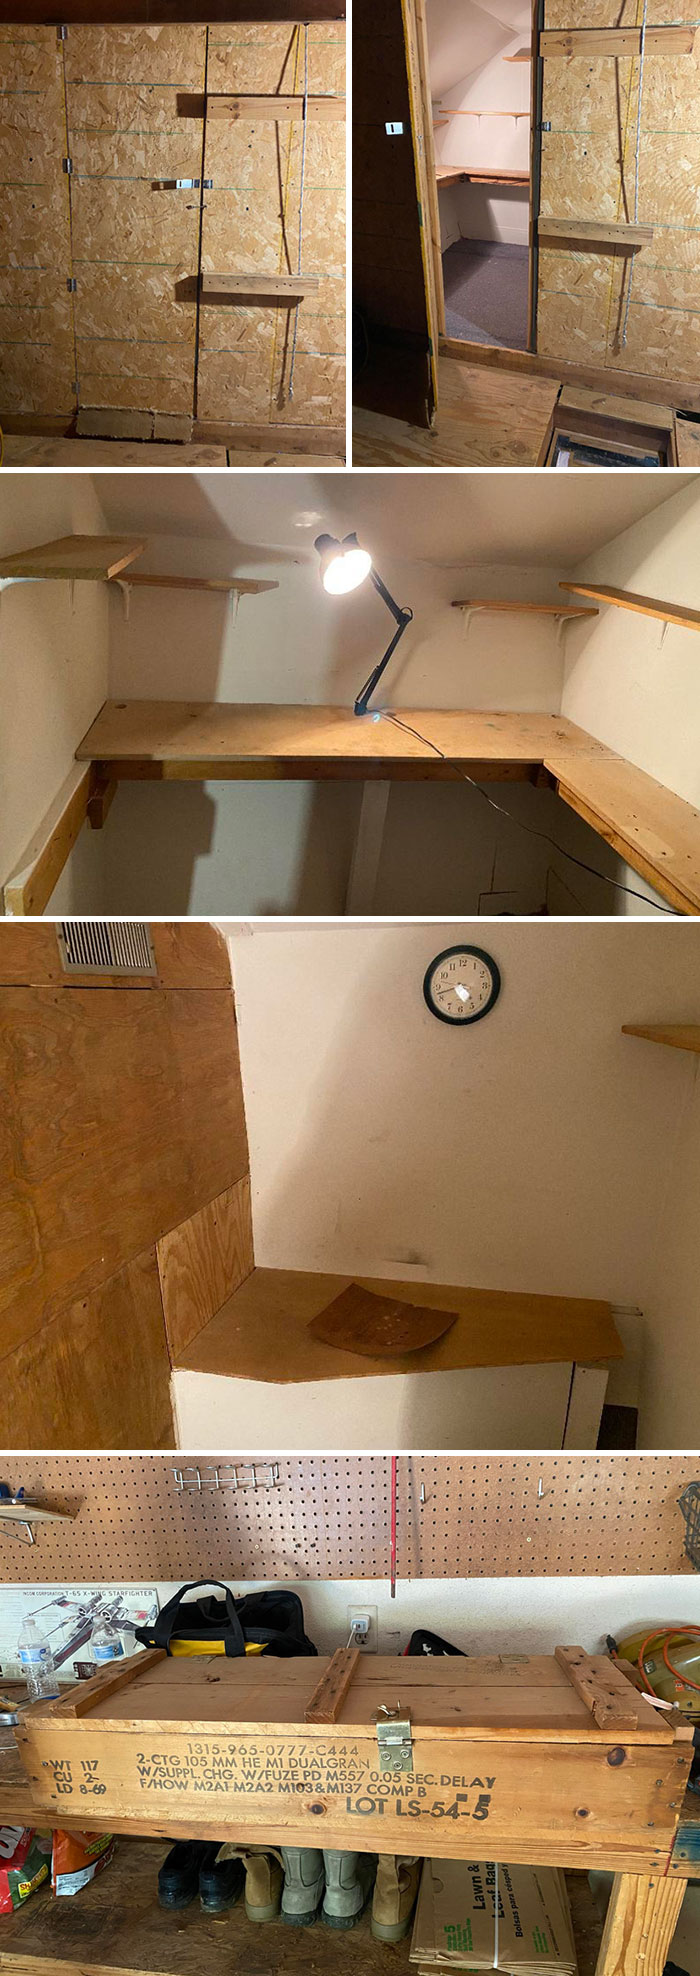 Found A Weird Room In The Attic Of My New House. It Was Not Listed On Any Of The Realtor Postings, Fully Carpeted, Has Power, And Is Connected To The House's A/C Unit